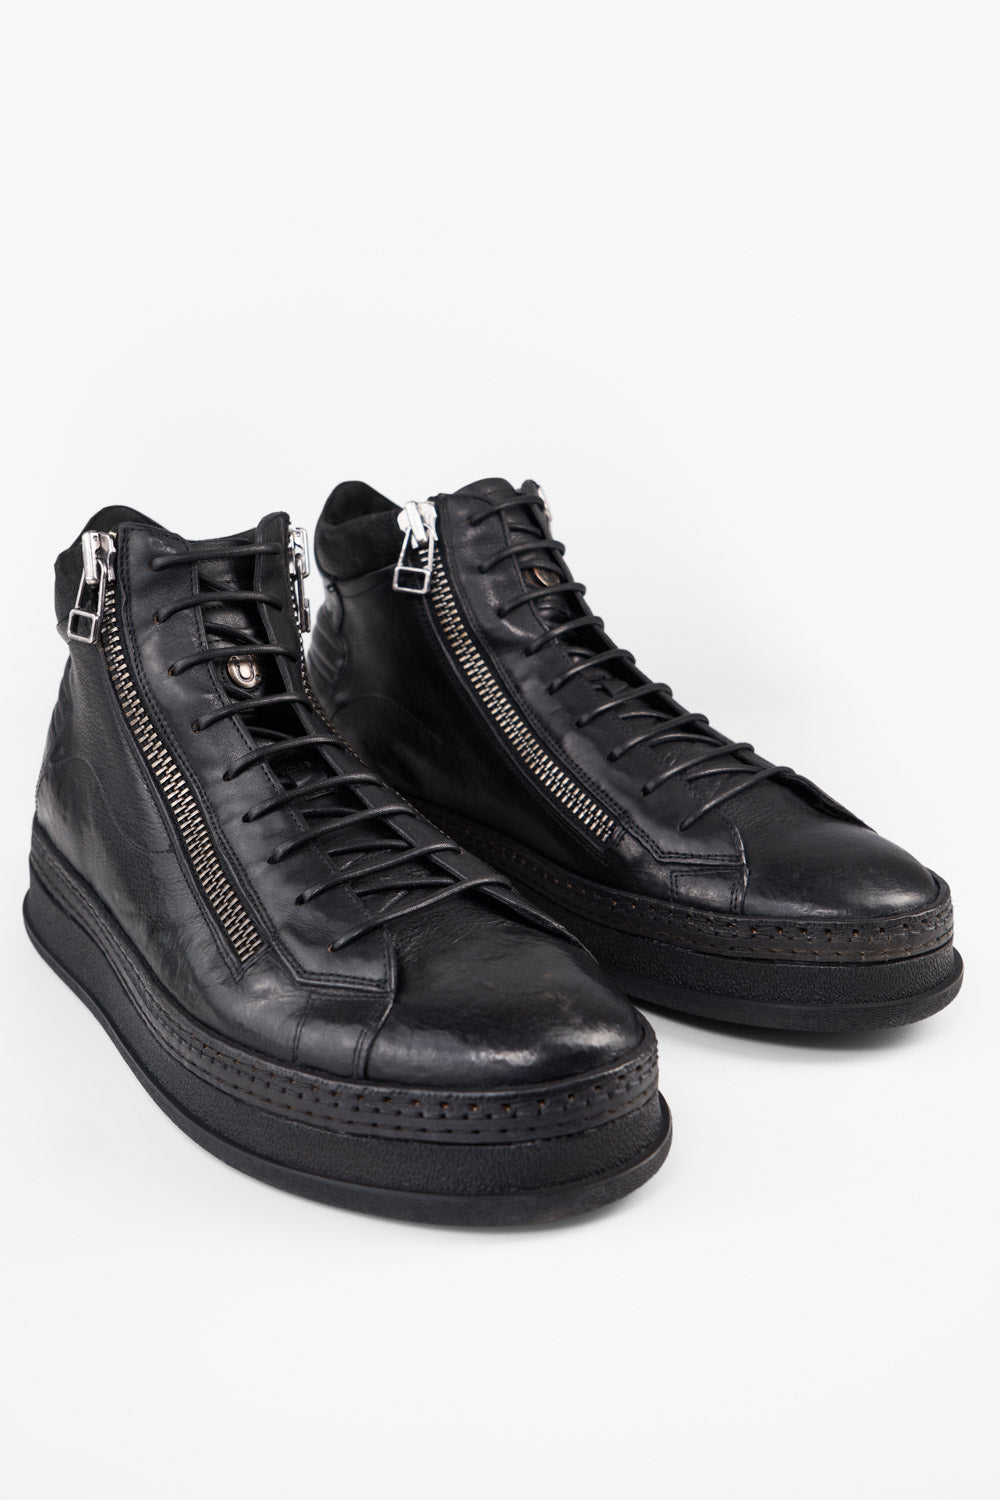 COLE urban-black double-zip welted high sneakers.